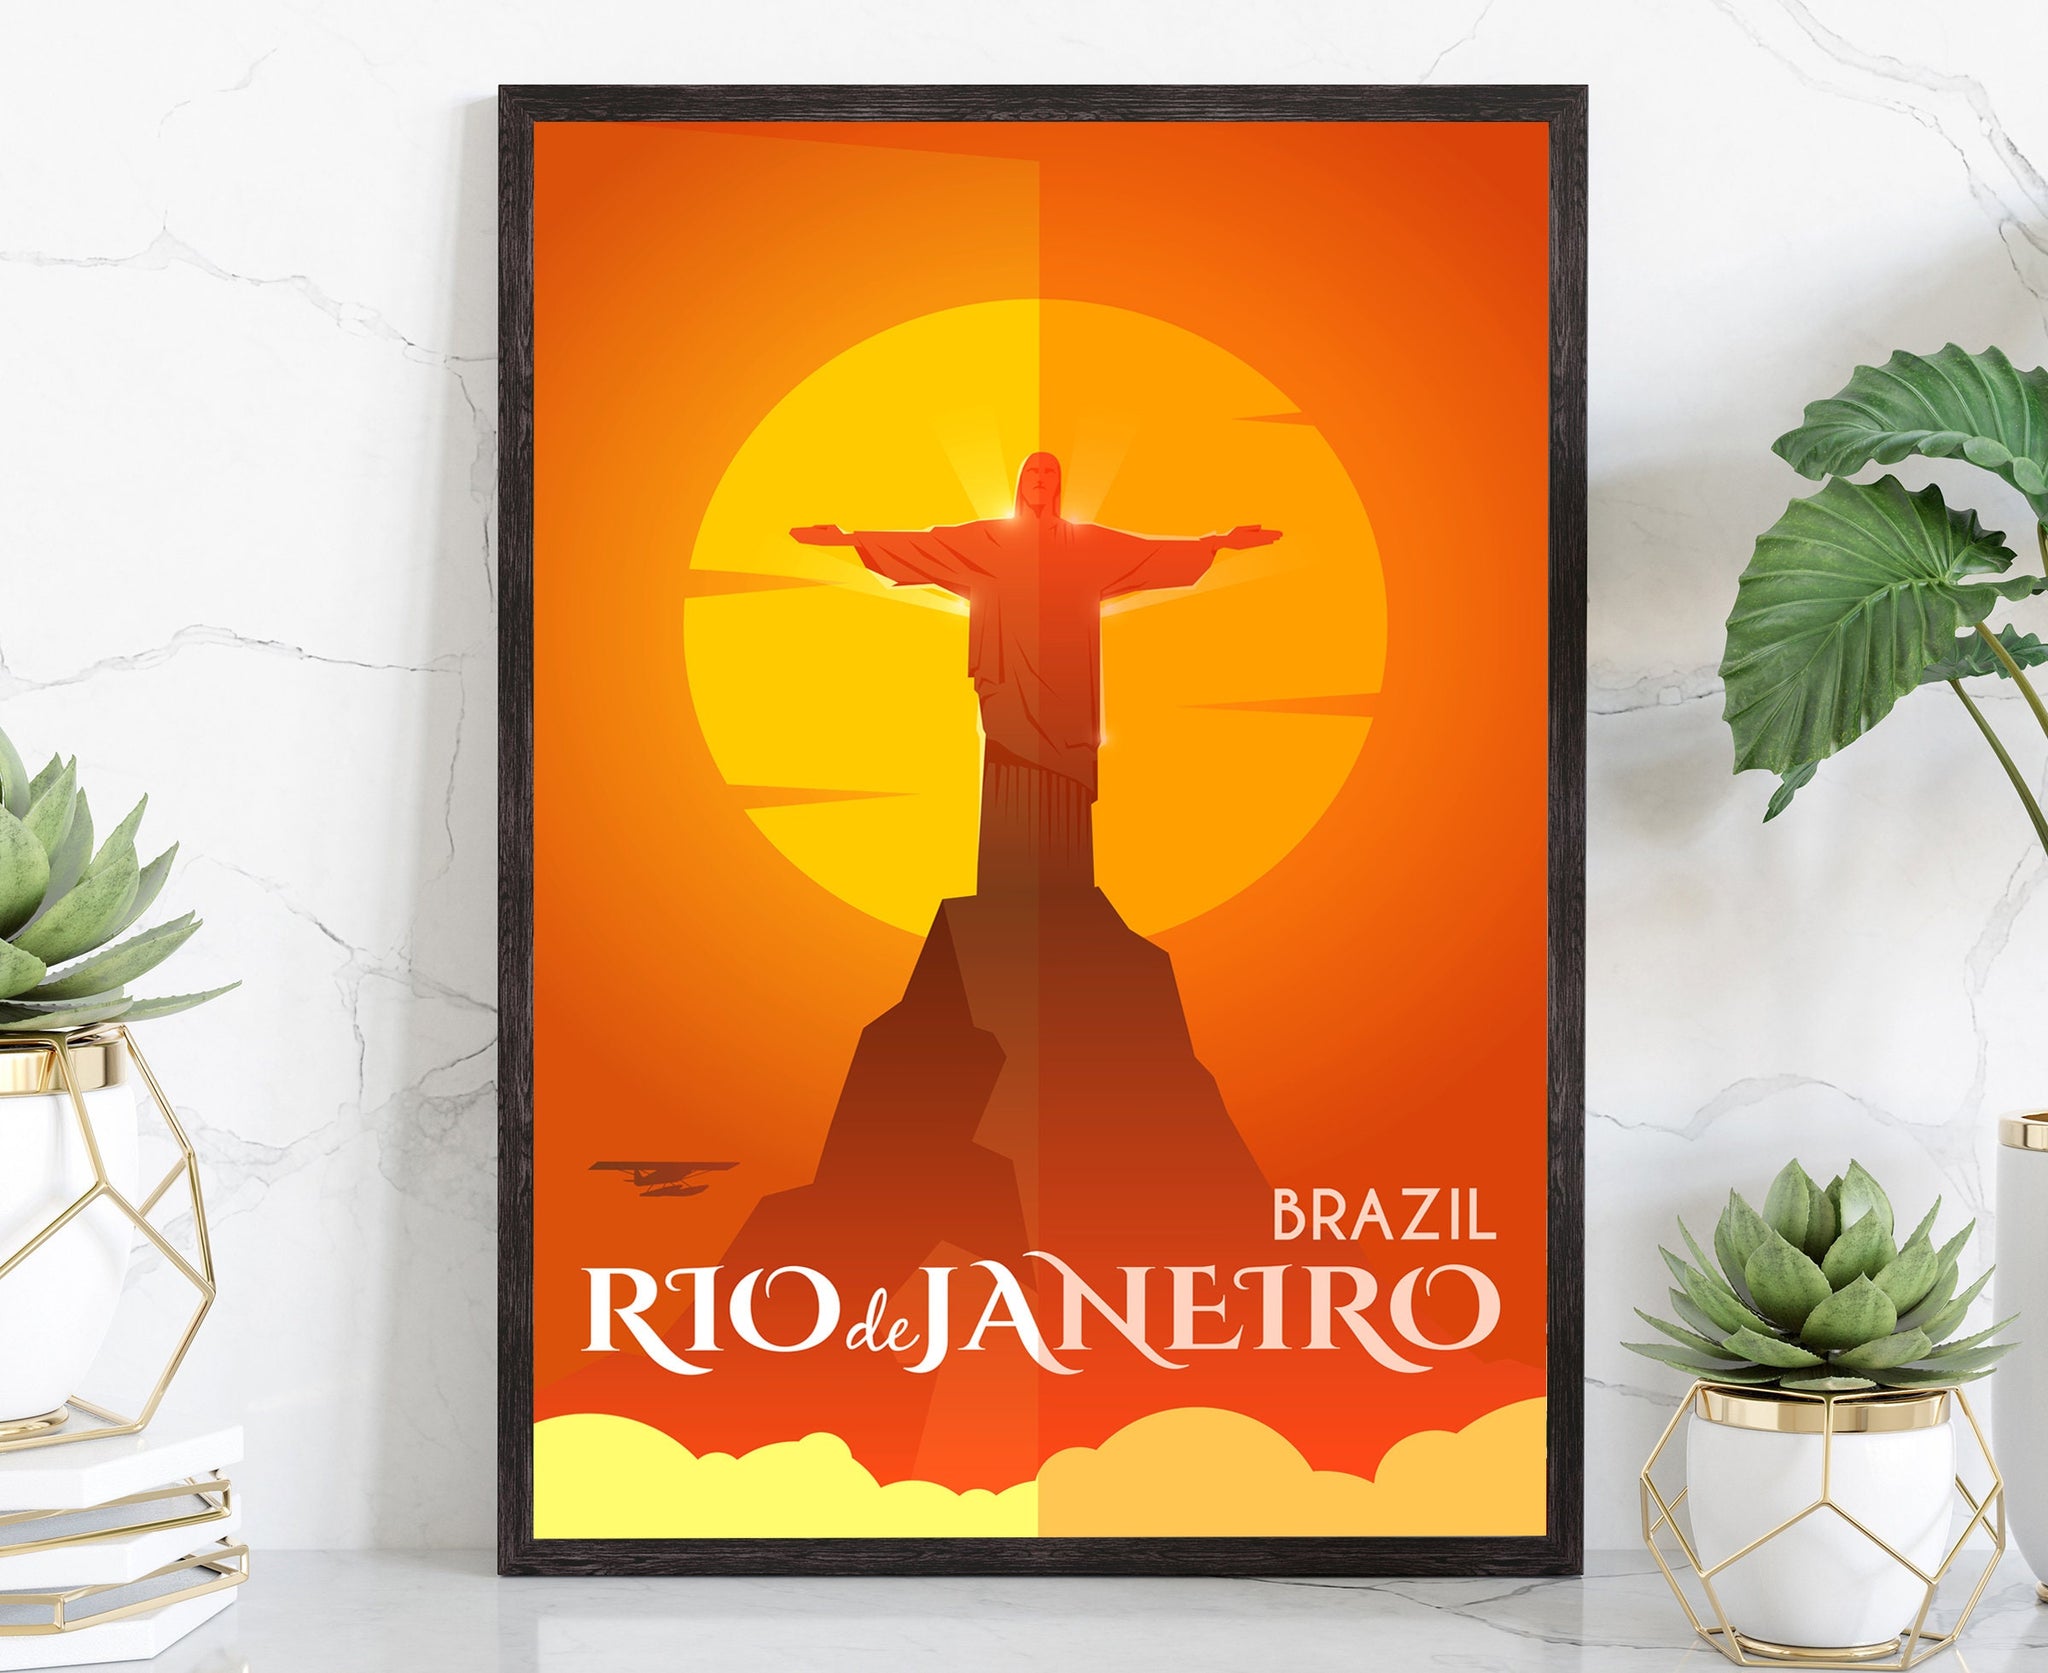 Retro Style Travel Poster, Brazil - Rio de Janeiro Vintage Rustic Poster Print, Home Wall Art, Office Wall Decors, Poster, City Map Poster